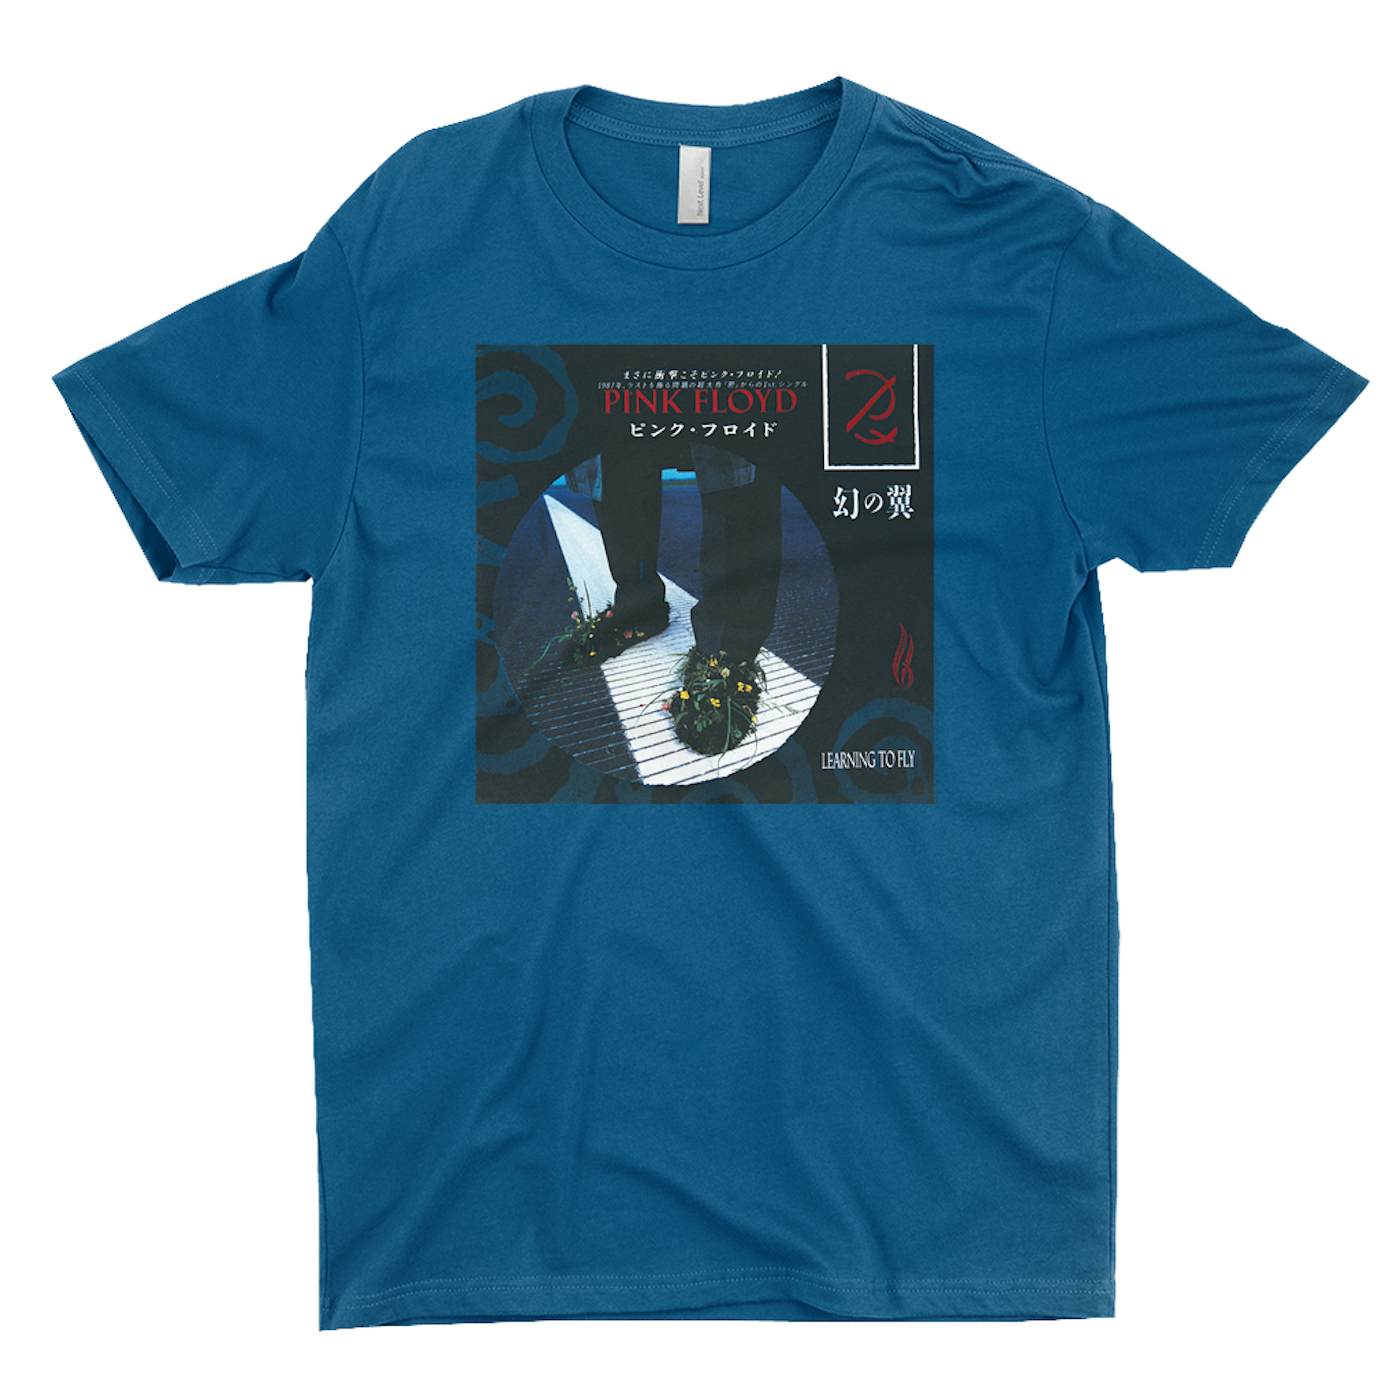 Pink Floyd T-Shirt | Learning To Fly Japanese Album Cover Pink Floyd Shirt